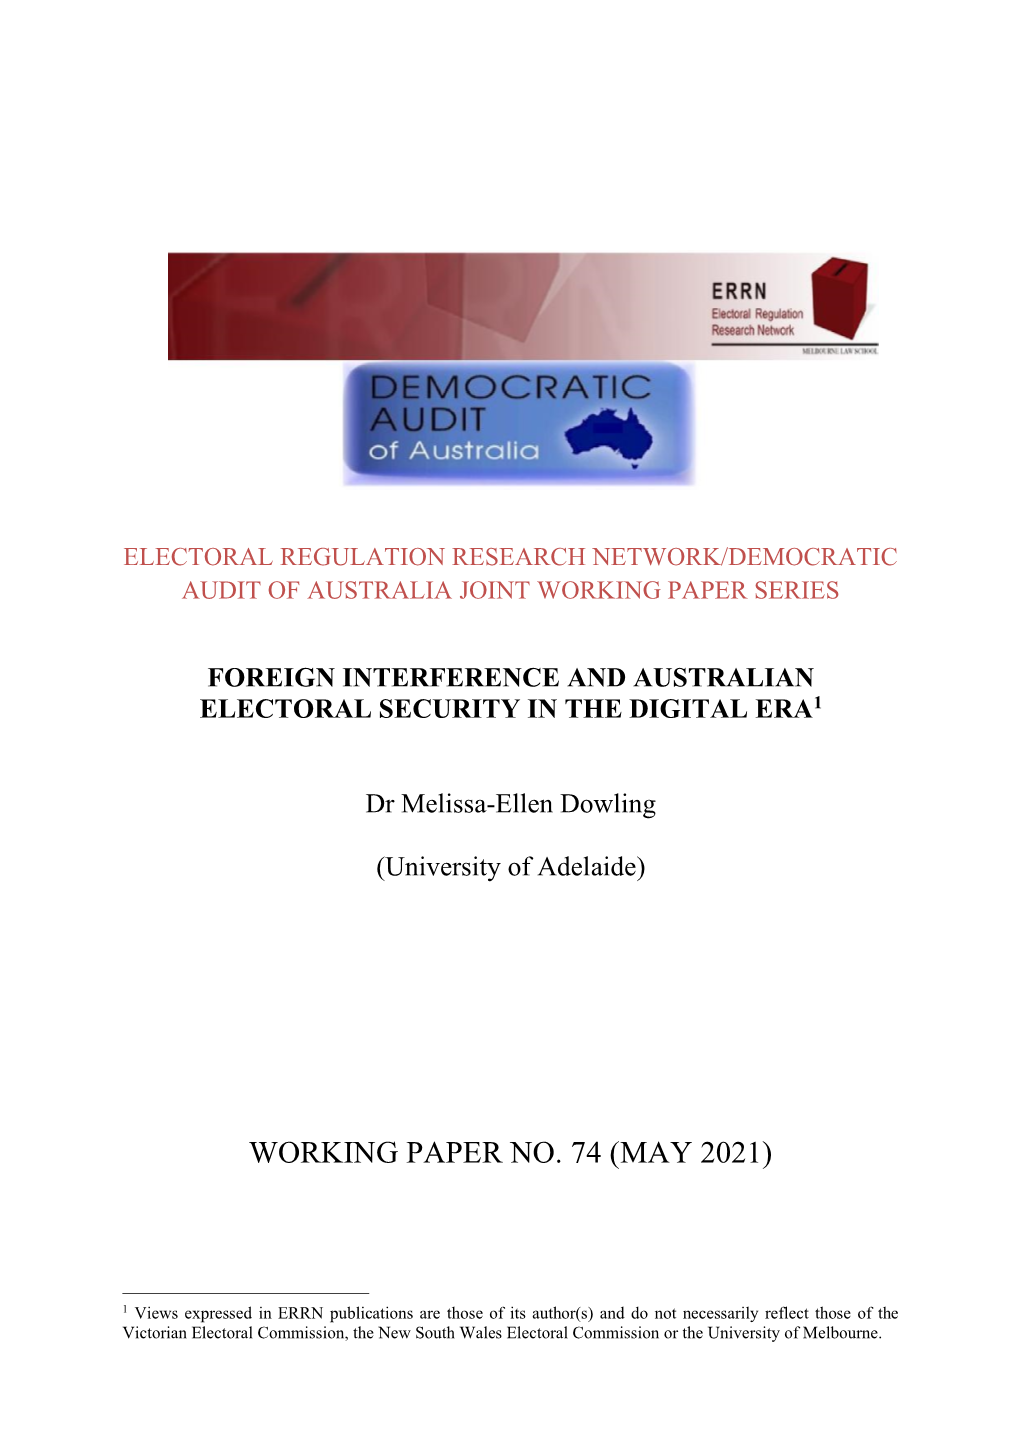 Foreign Interference and Australian Electoral Security in the Digital Era1